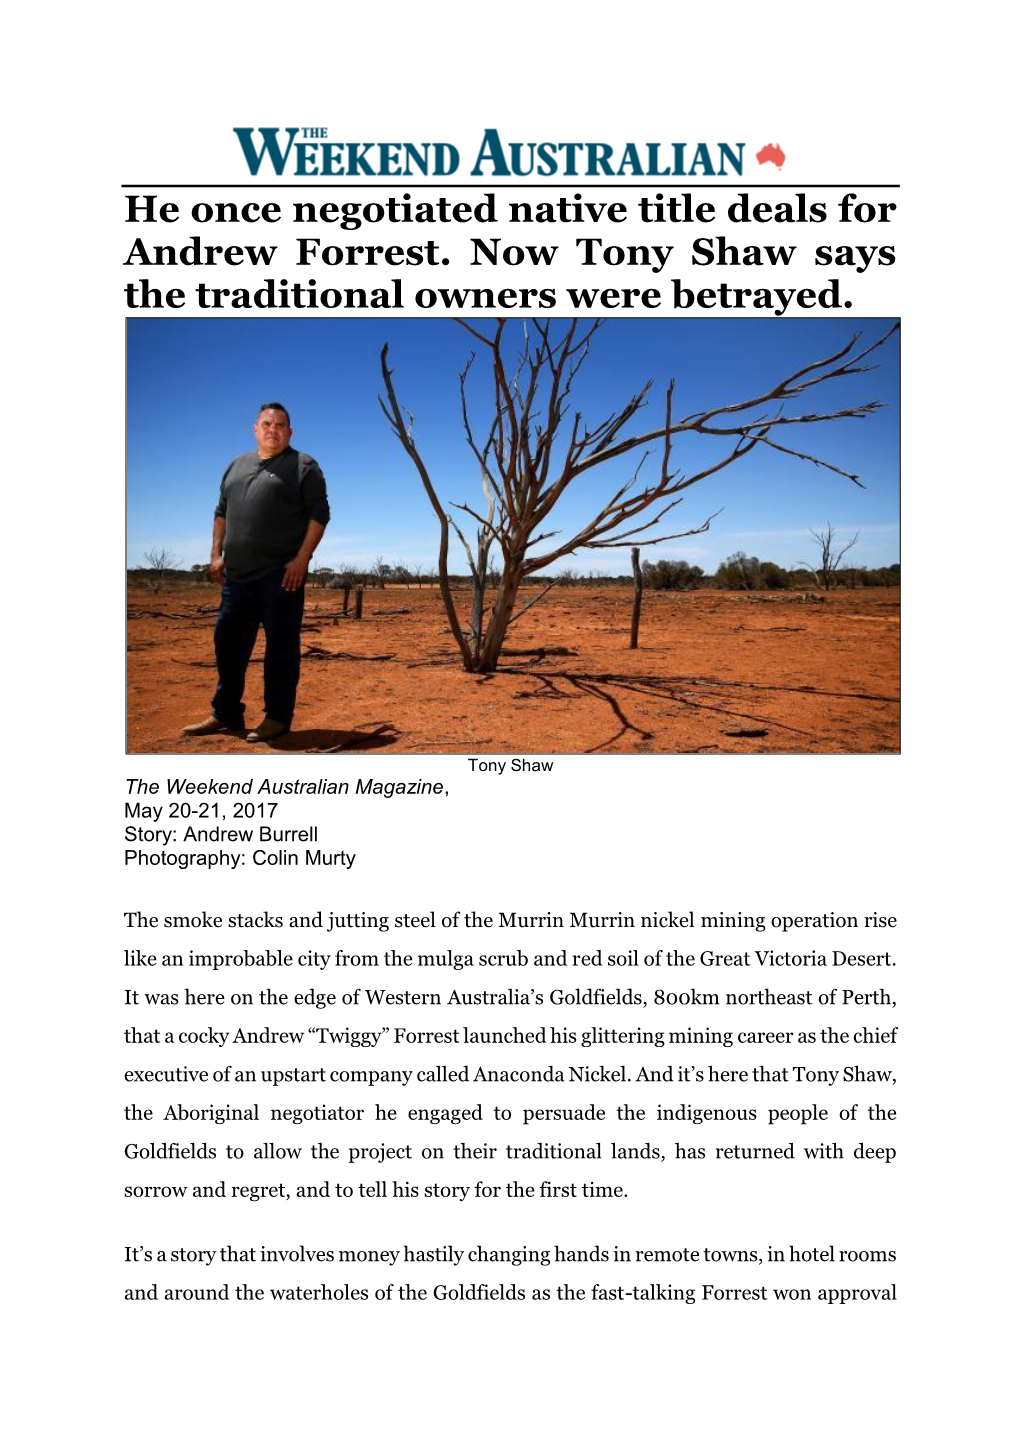 He Once Negotiated Native Title Deals for Andrew Forrest. Now Tony Shaw Says the Traditional Owners Were Betrayed